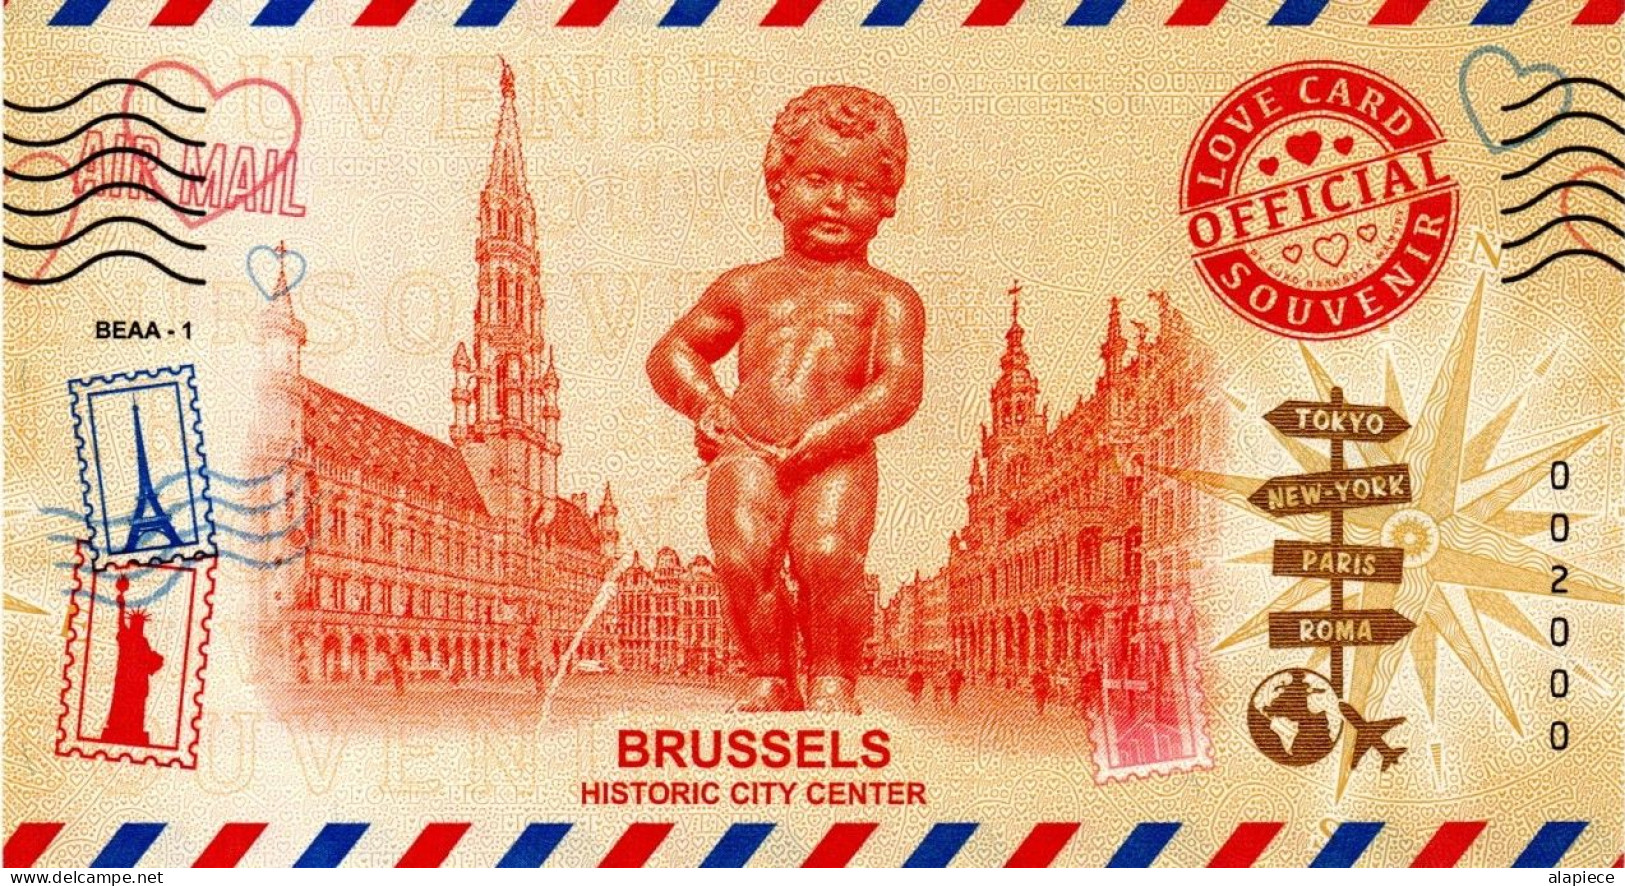 Billet "love Card Souvenir" - Brussels - Historic City Center (BEAA-1) N°2000 - Private Proofs / Unofficial